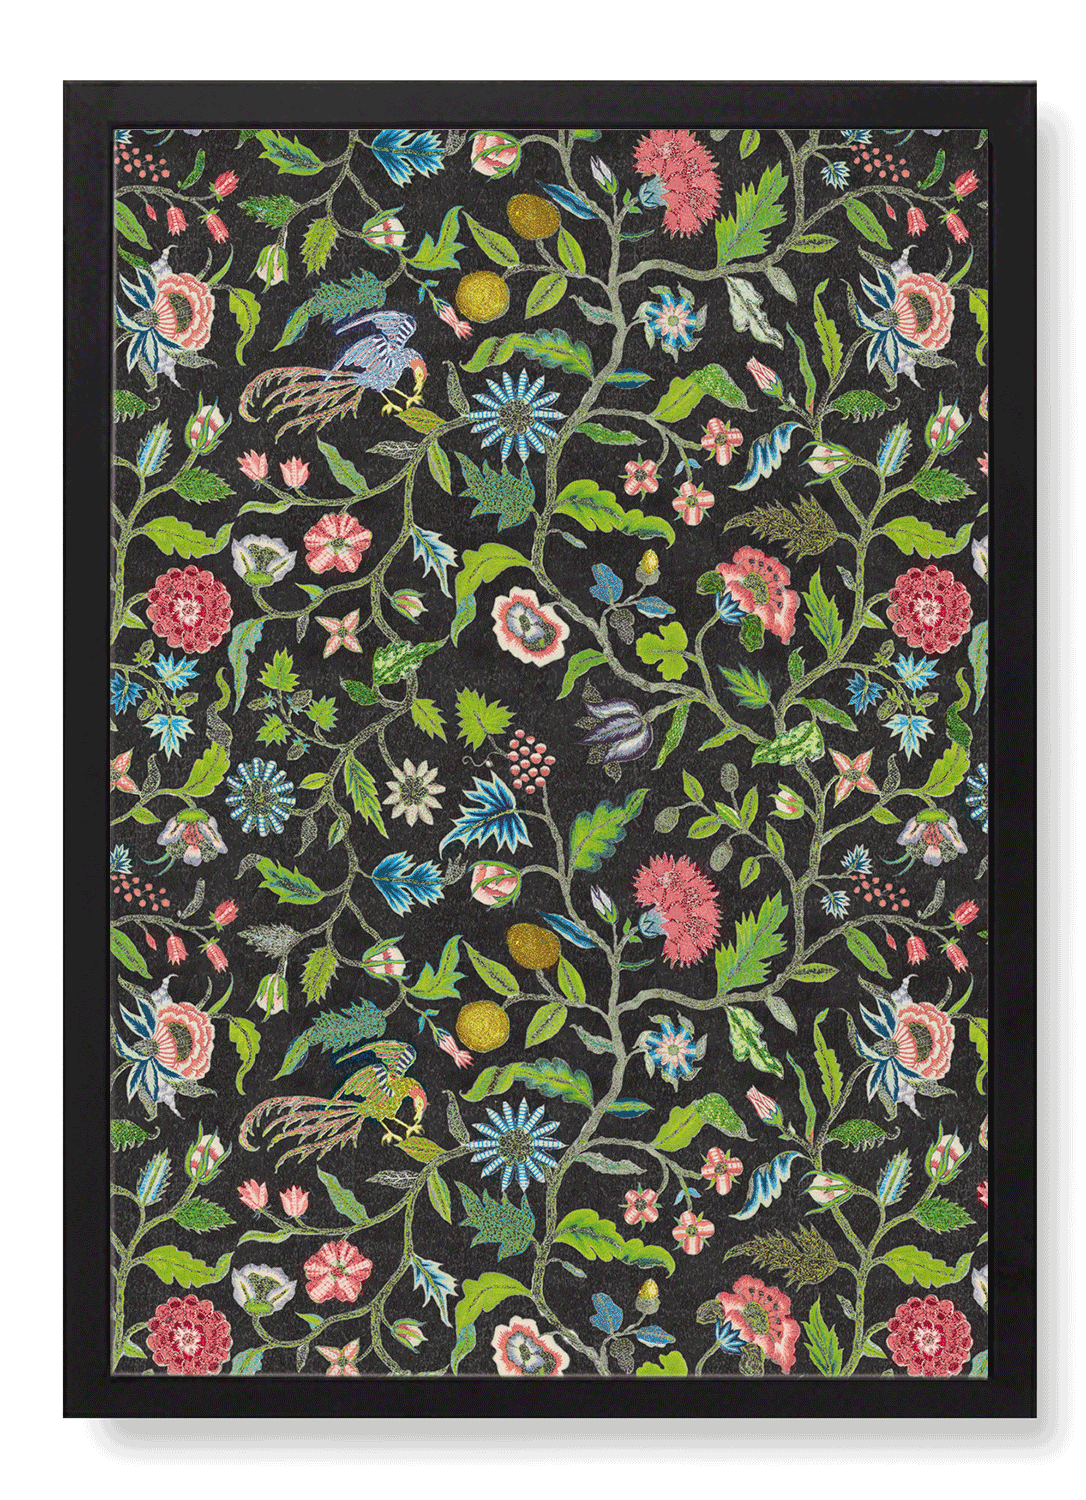 COVERLET EMBROIDERY ON BLACK (18TH C.)